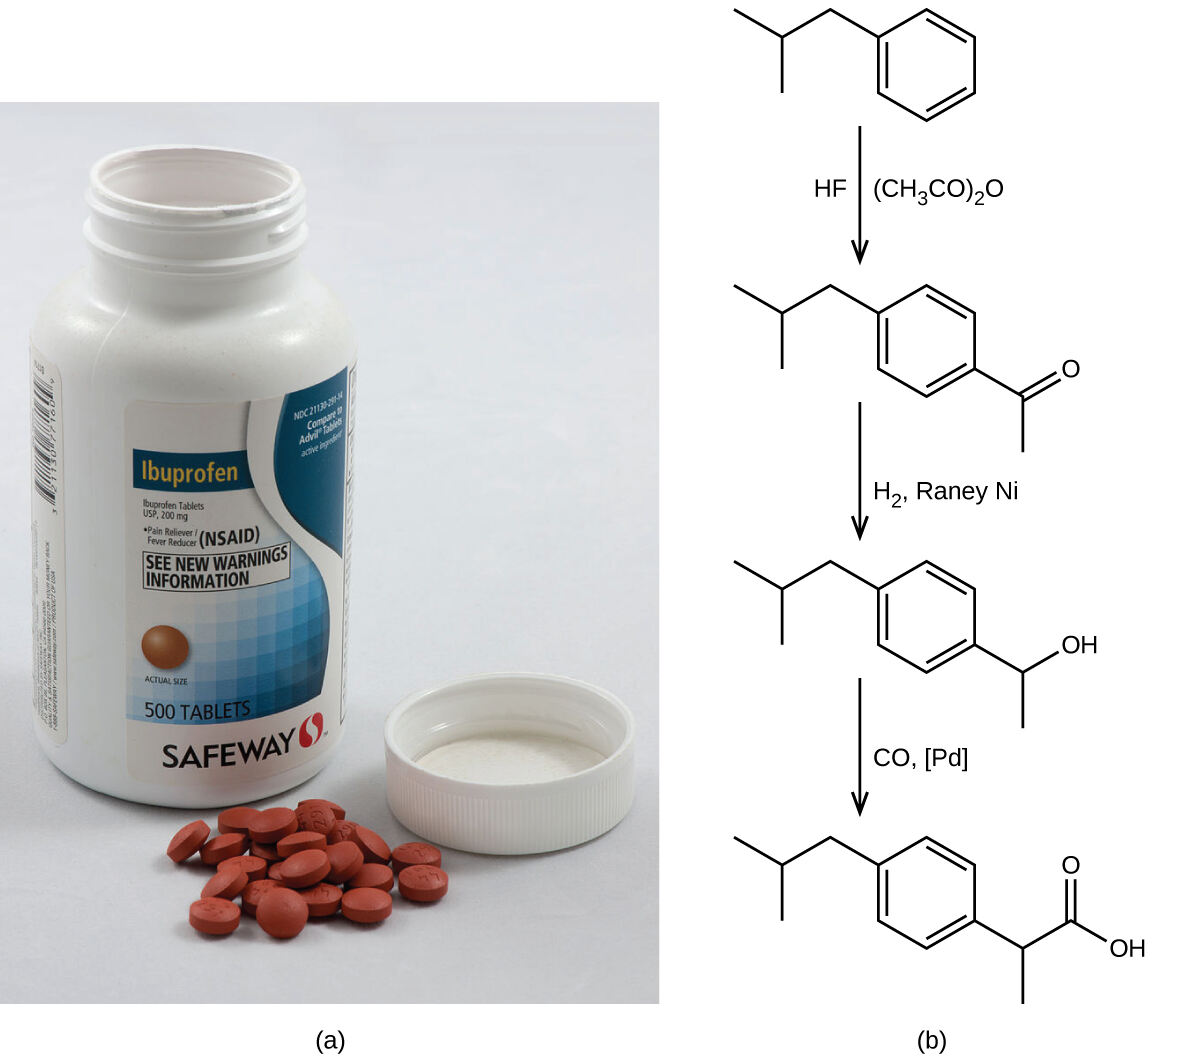 This figure is labeled, “a,” and, “b.” Part a shows an open bottle of ibuprofen and a small pile of ibuprofen tablets beside it. Part b shows a reaction along with line structures. The first line structure looks like a diagonal line pointing down and to the right, then up and to the right and then down and to the right. At this point it connects to a hexagon with alternating double bonds. At the first trough there is a line that points straight down. From this structure, there is an arrow pointing downward. The arrow is labeled, “H F,” on the left and “( C H subscript 3 C O ) subscript 2 O,” on the right. The next line structure looks exactly like the first line structure, but it has a line angled down and to the right from the lower right point of the hexagon. This line is connected to another line which points straight down. Where these two lines meet, there is a double bond to an O atom. There is another arrow pointing downward, and it is labeled, “H subscript 2, Raney N i.” The next structure looks very similar to the second, previous structure, except in place of the double bonded O, there is a singly bonded O H group. There is a final reaction arrow pointing downward, and it is labeled, “C O, [ P d ].” The final structure is similar to the third, previous structure except in place of the O H group, there is another line that points down and to the right to an O H group. At these two lines, there is a double bonded O.